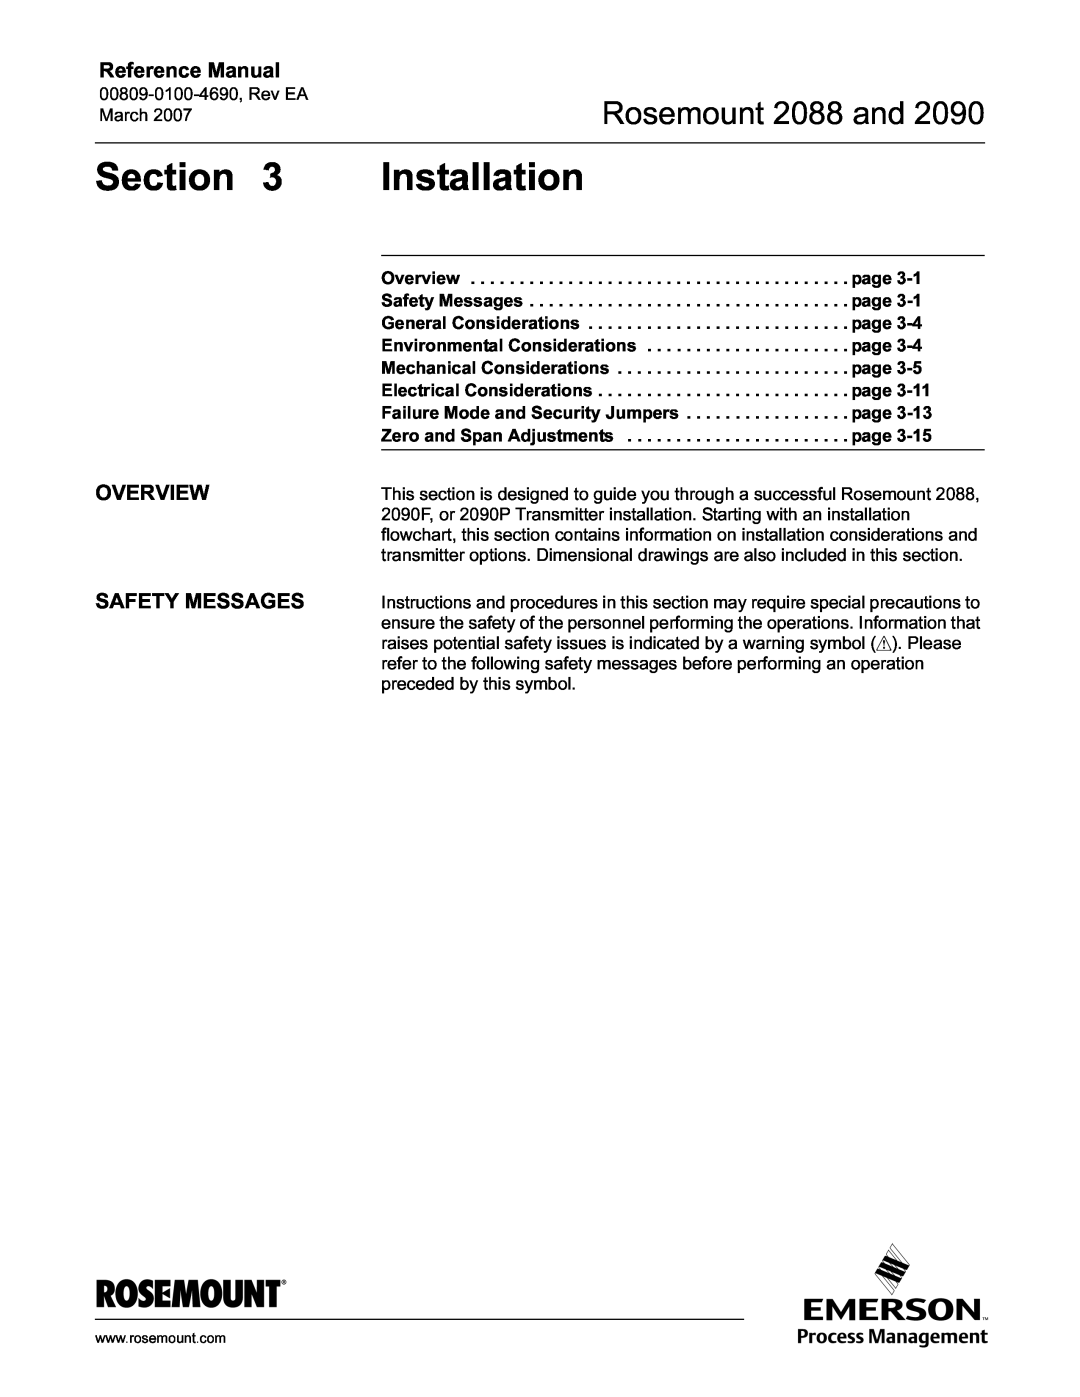 Emerson Process Management manual Rosemount 2088 and, Reference Manual, Overview Safety Messages, Section, Installation 